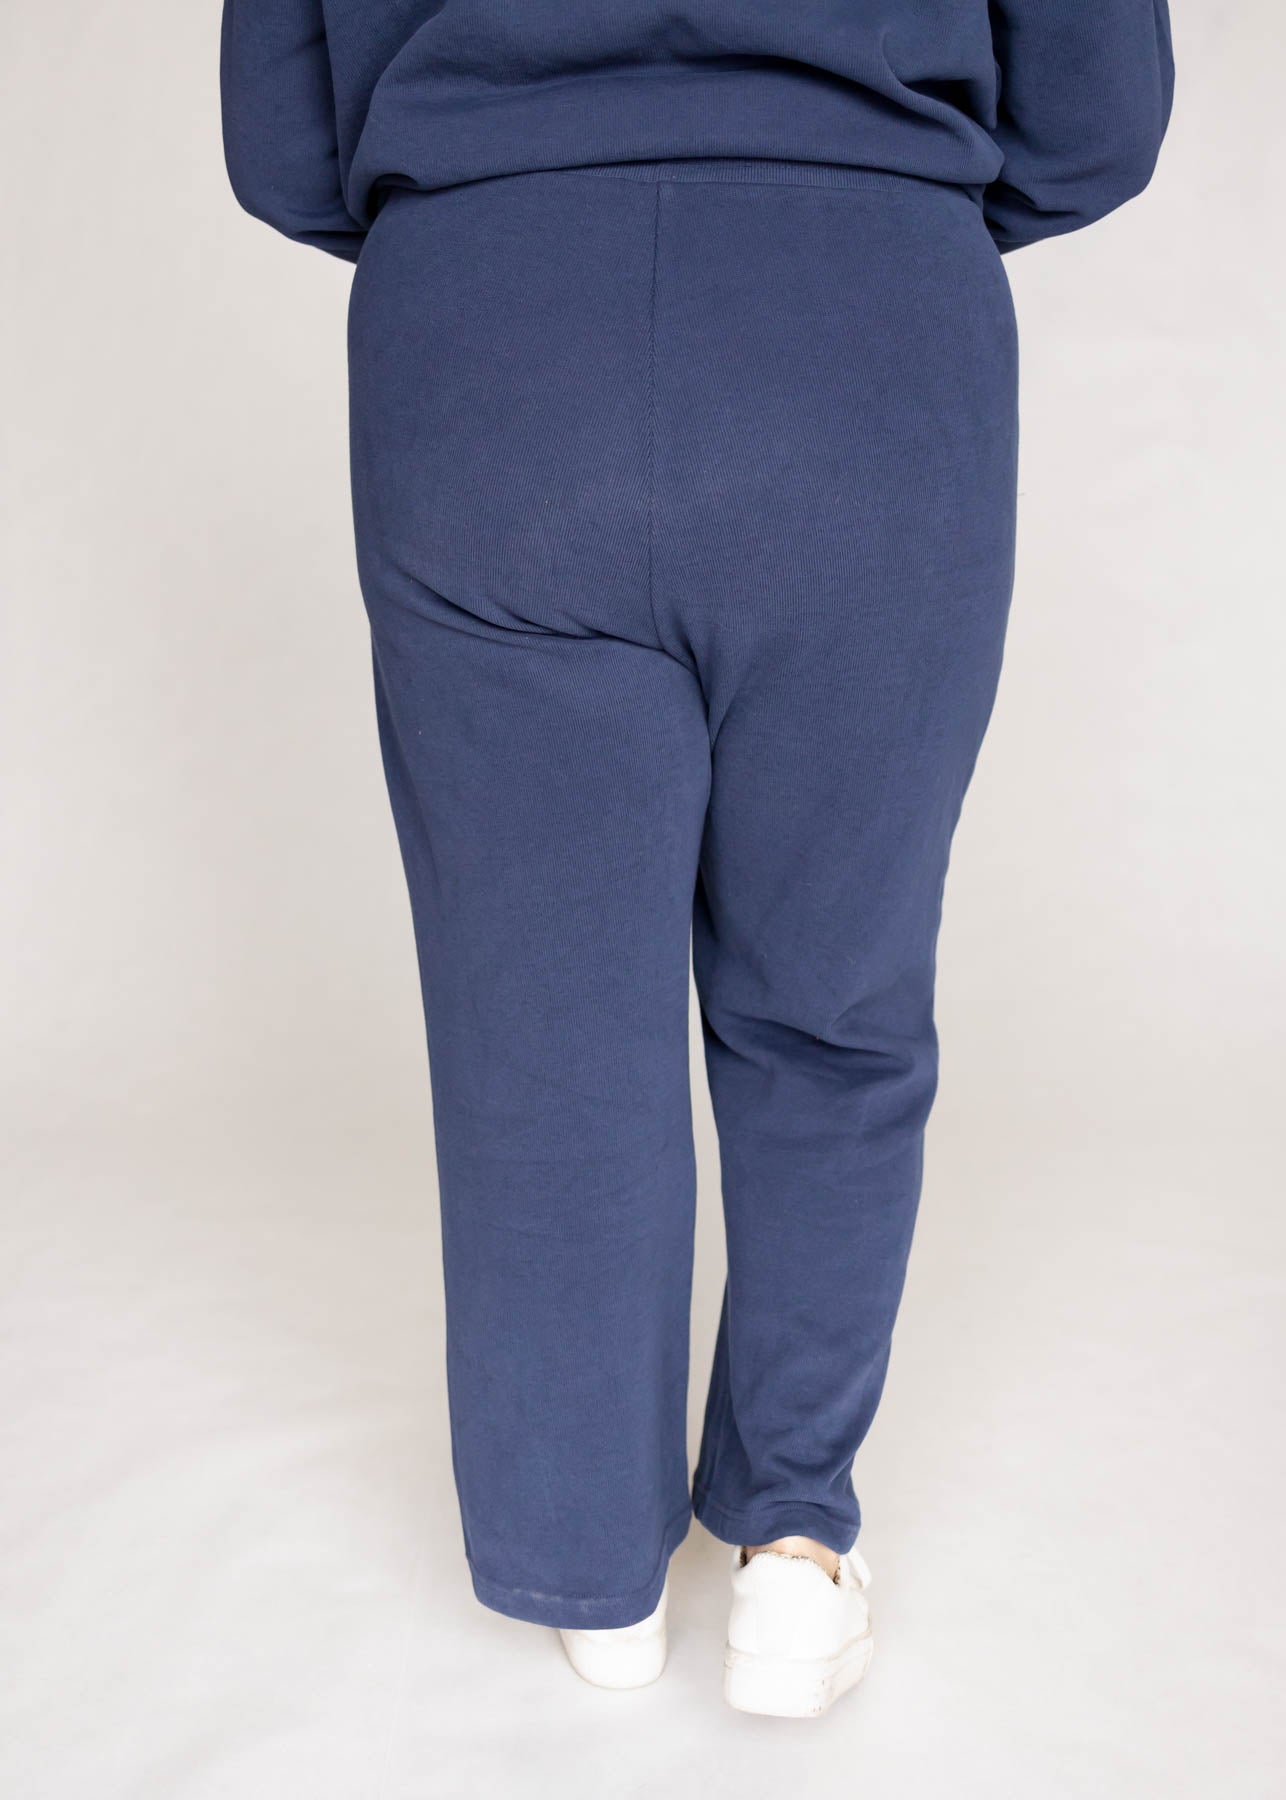 Back view of Plus size dark blue pants